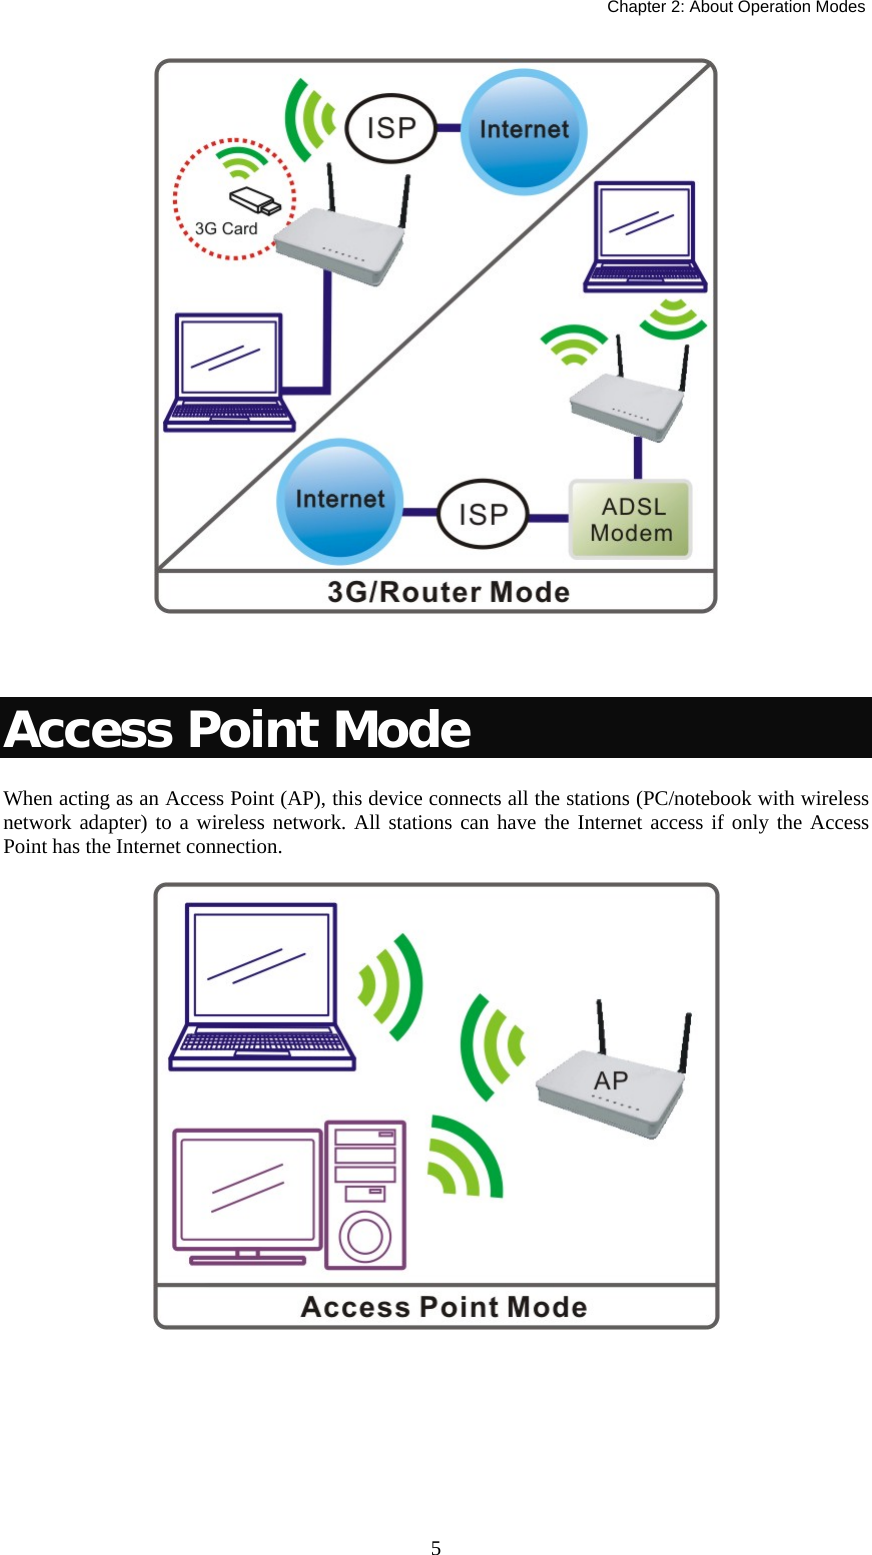   Chapter 2: About Operation Modes  5  Access Point Mode When acting as an Access Point (AP), this device connects all the stations (PC/notebook with wireless network adapter) to a wireless network. All stations can have the Internet access if only the Access Point has the Internet connection.    